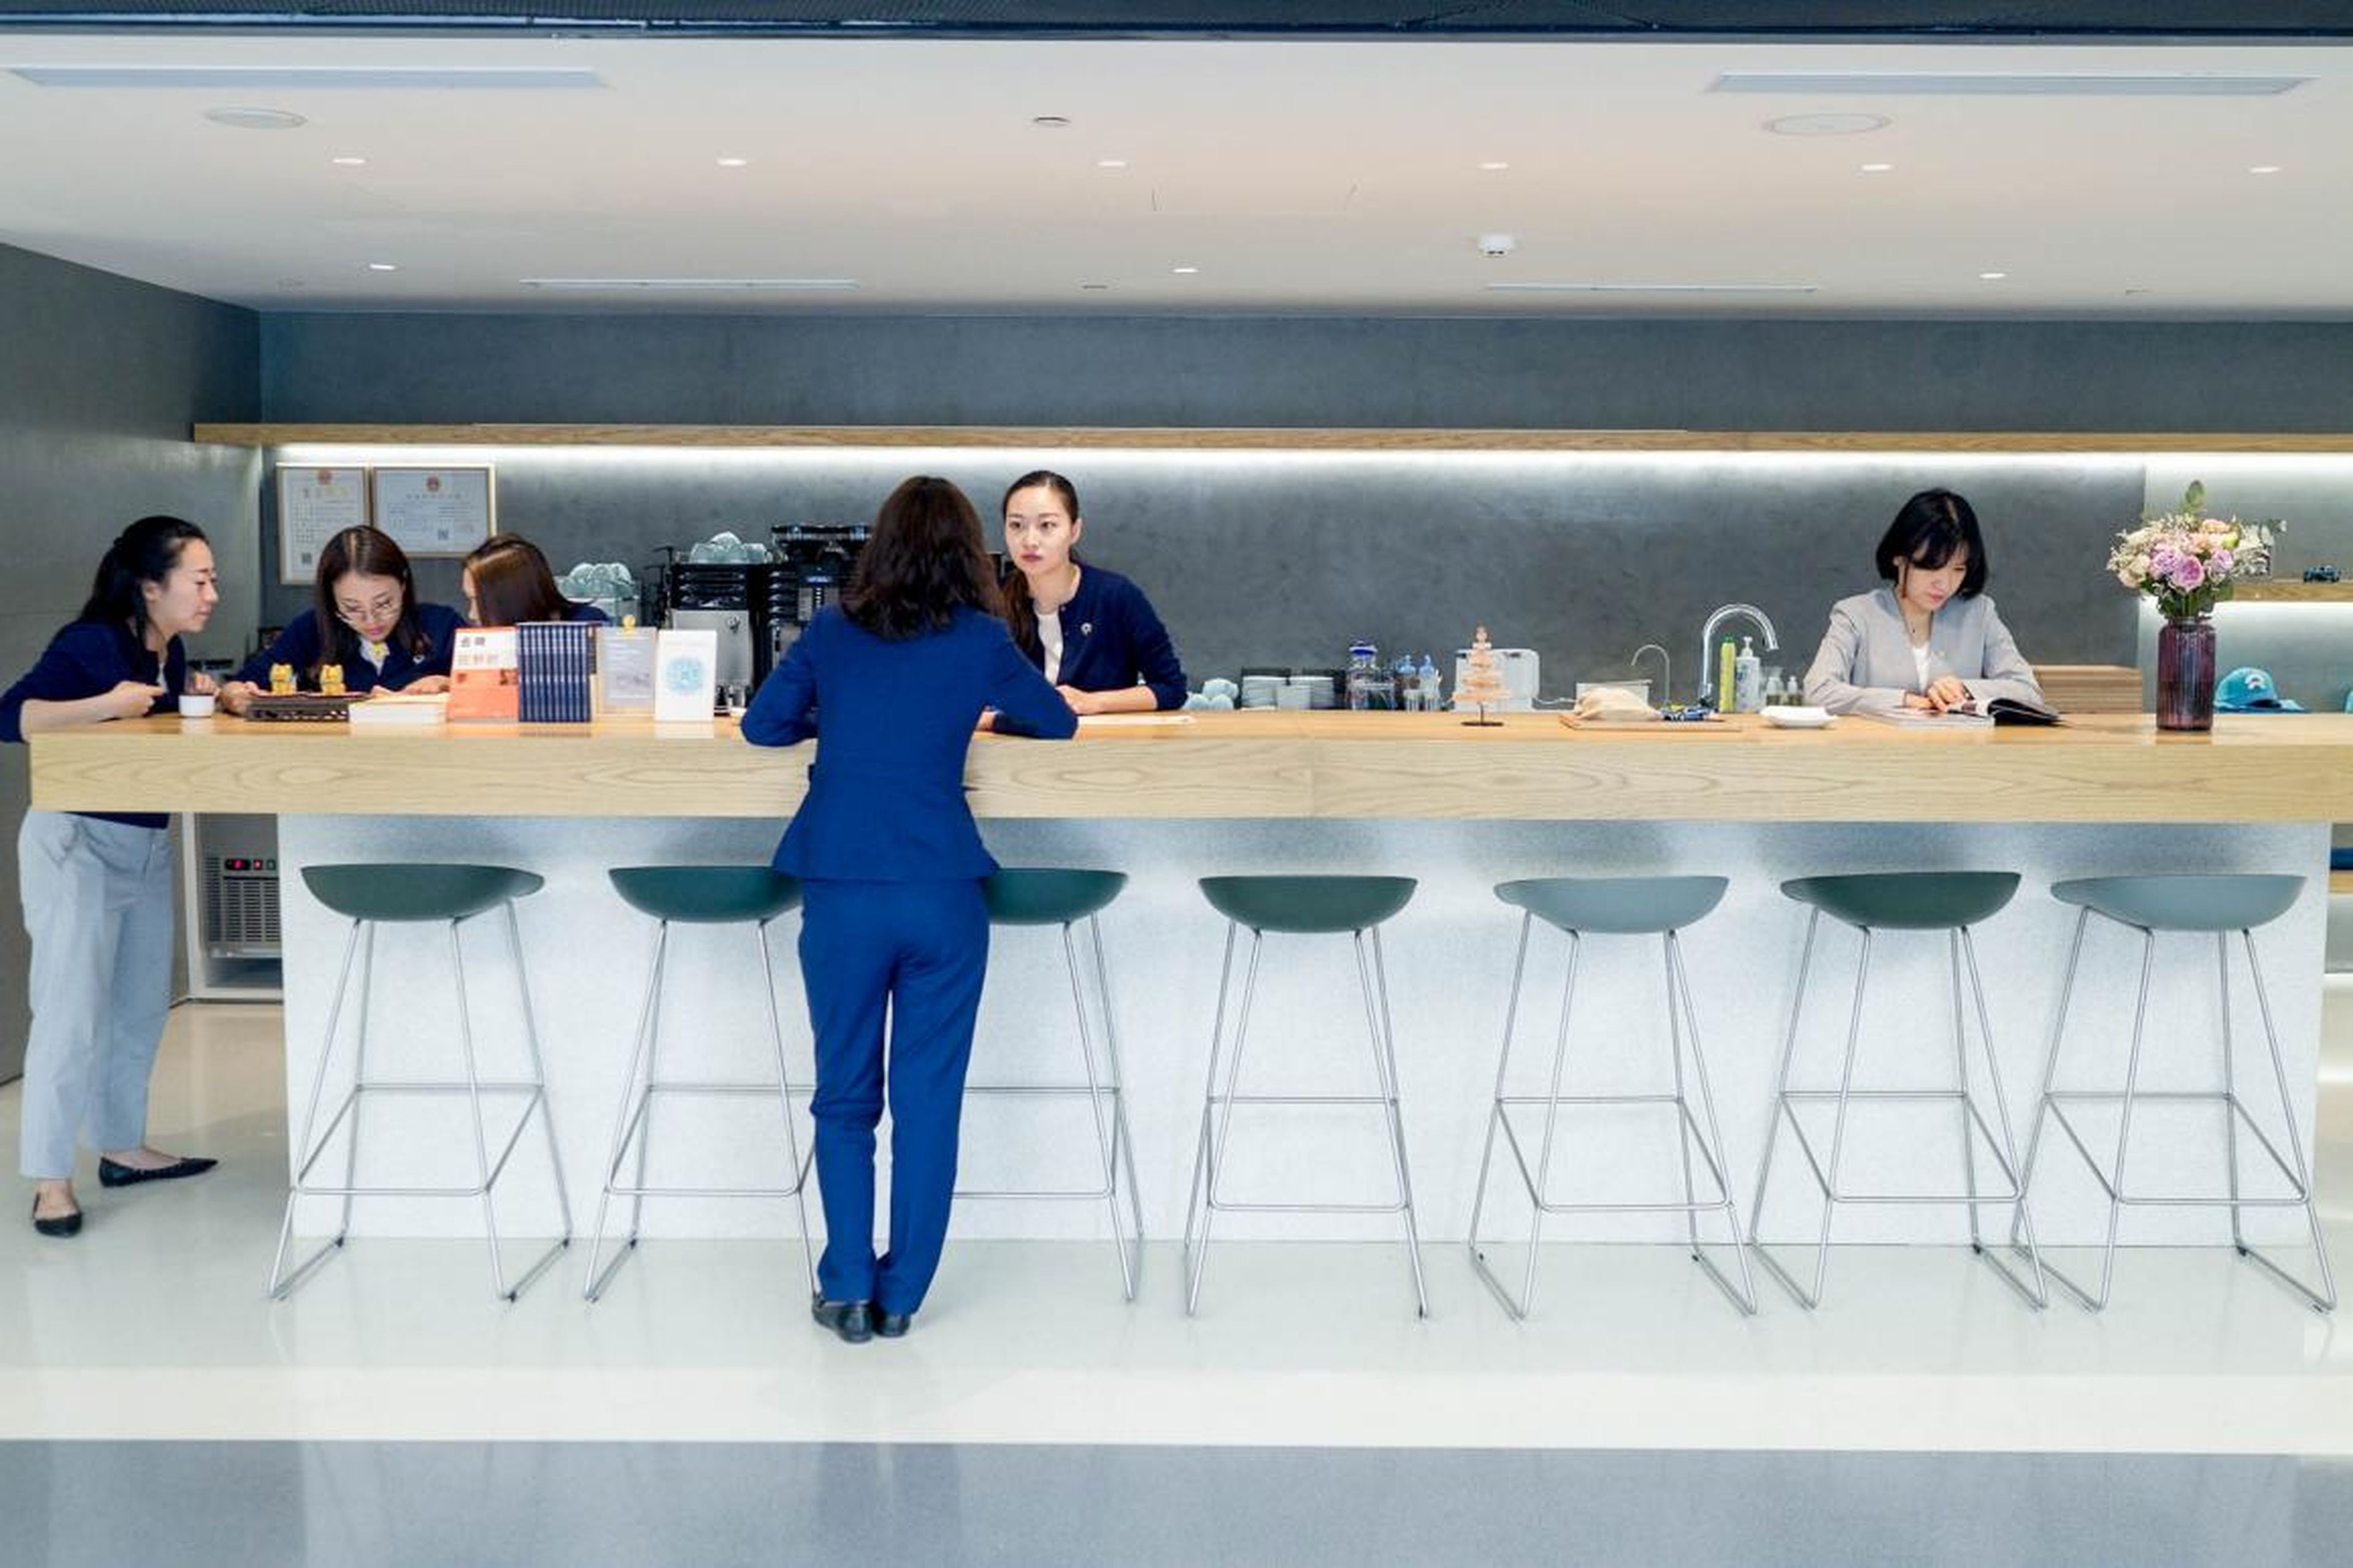 There's an open-plan kitchen where Nio's baristas serve up fresh coffee and snacks.